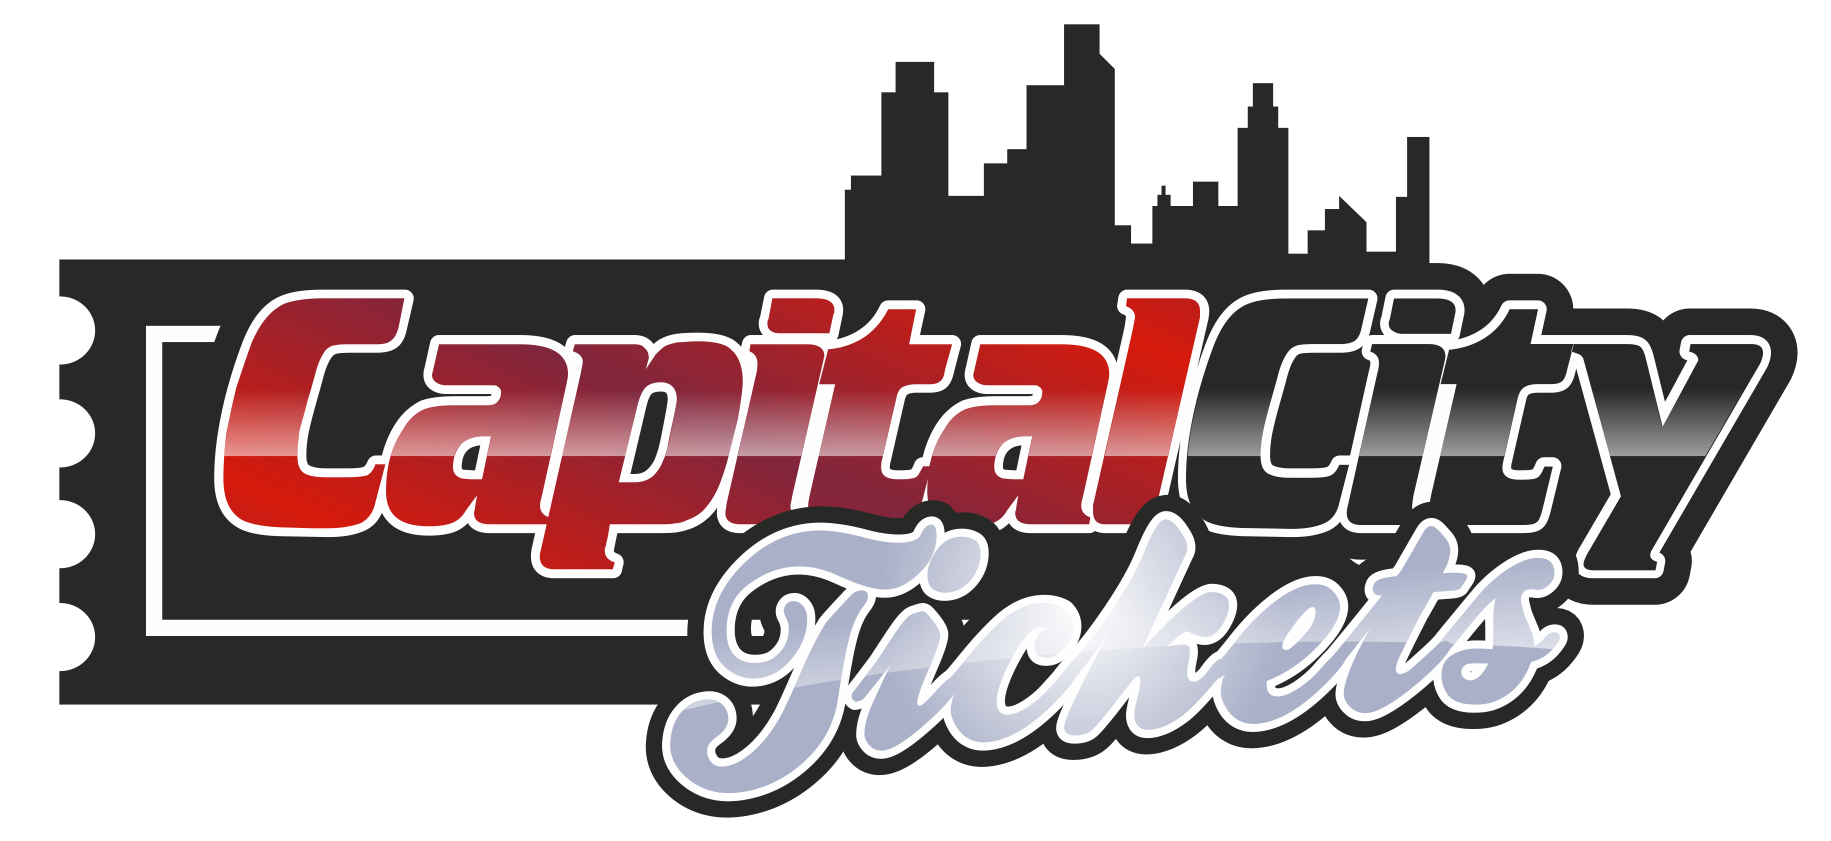 Discount 2021 Barenaked Ladies Concert Tickets with Promo/Discount Code Online at Capital City Tickets - Lawn, Front Row, and Reserved Tickets Available